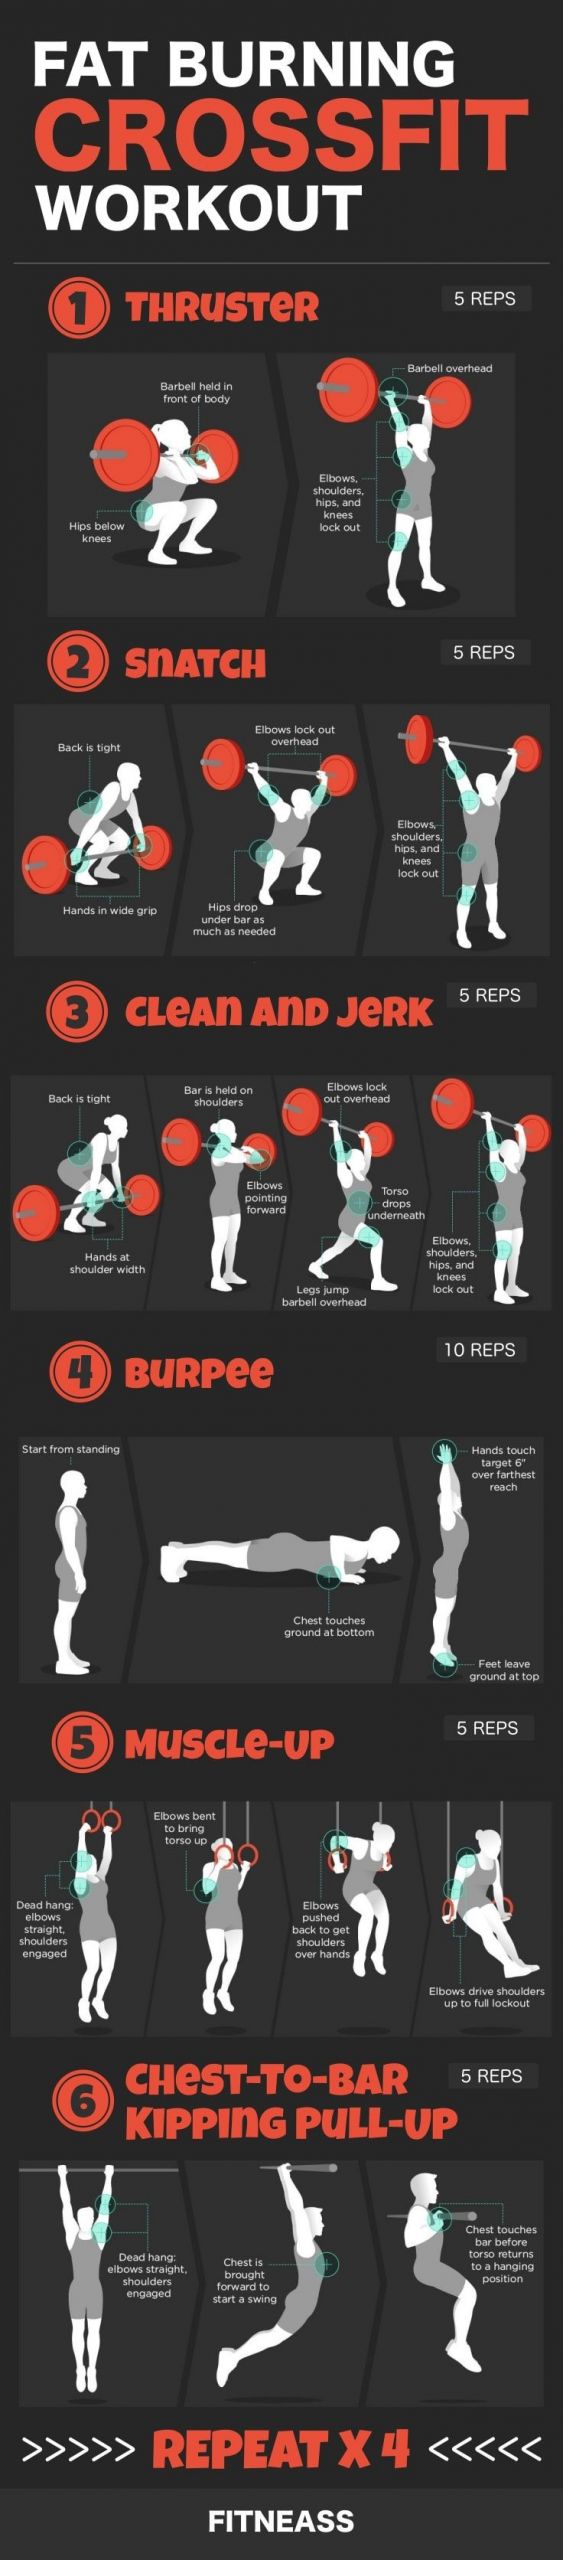 Crossfit Fat Burning Workouts
 6 Fat Burning CrossFit Moves To Tone Your Entire Body